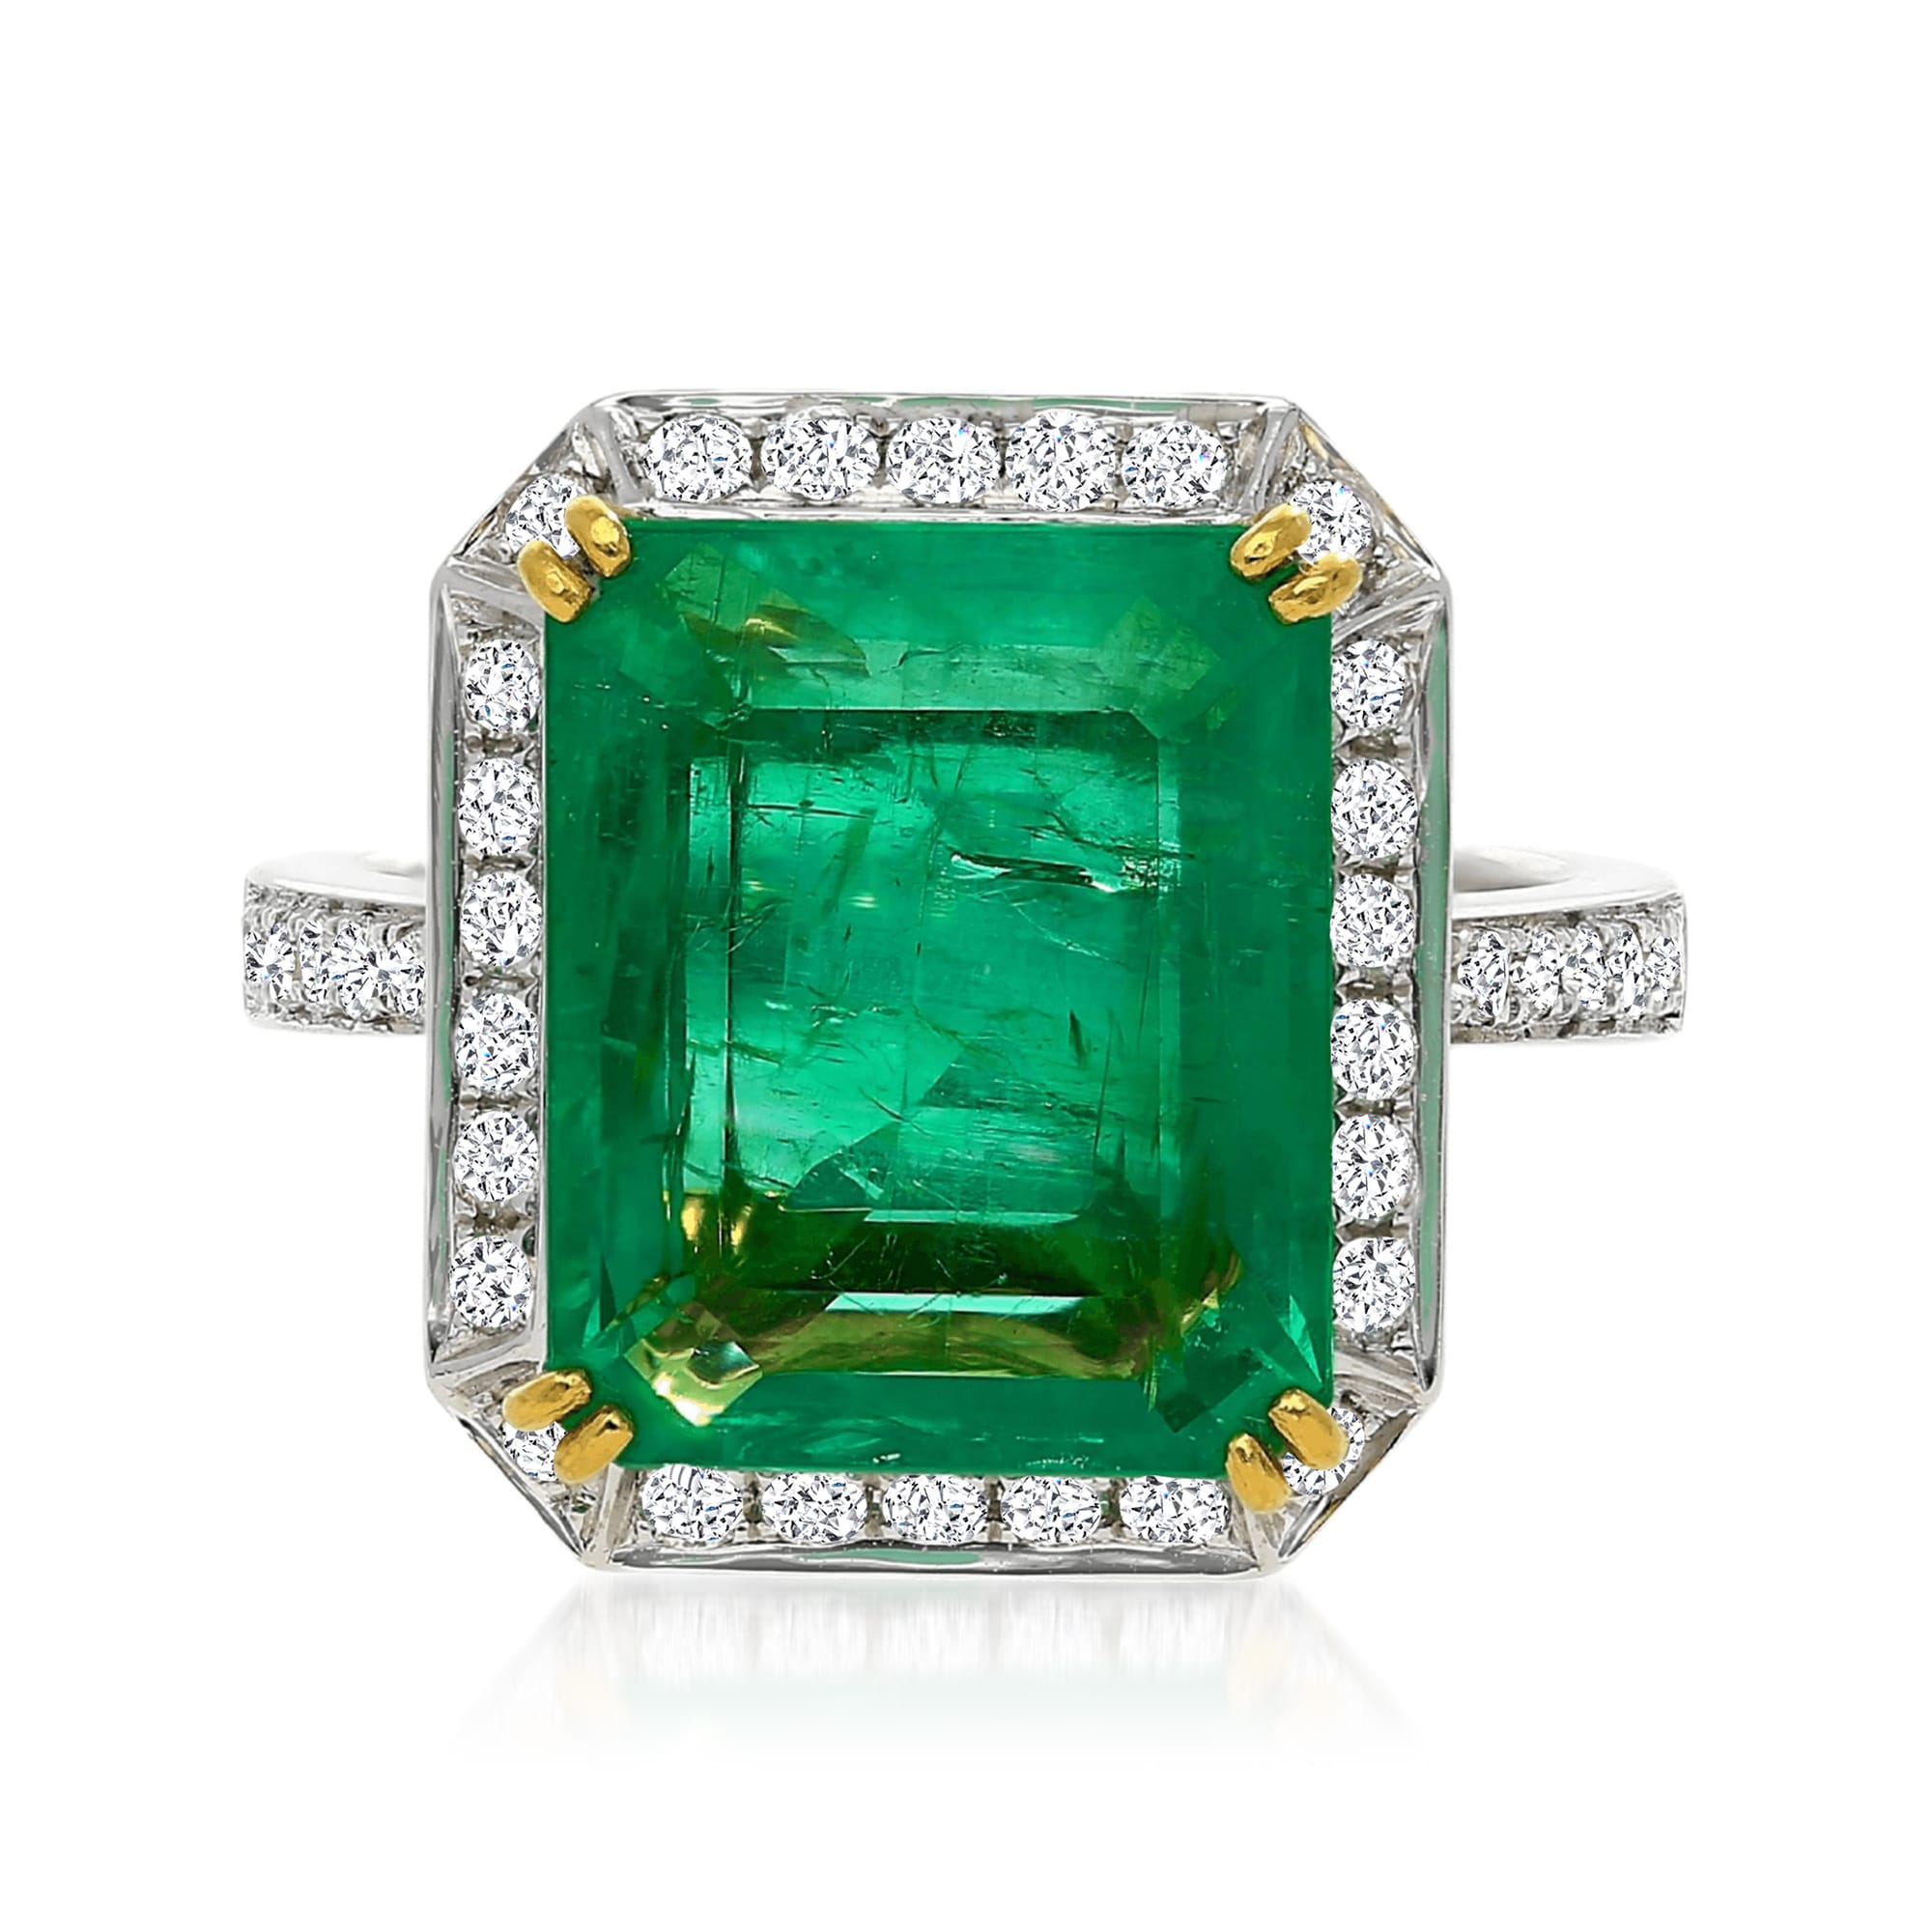 8.25 Carat Emerald Ring with .55 ct. t.w. Diamonds in 18kt Two